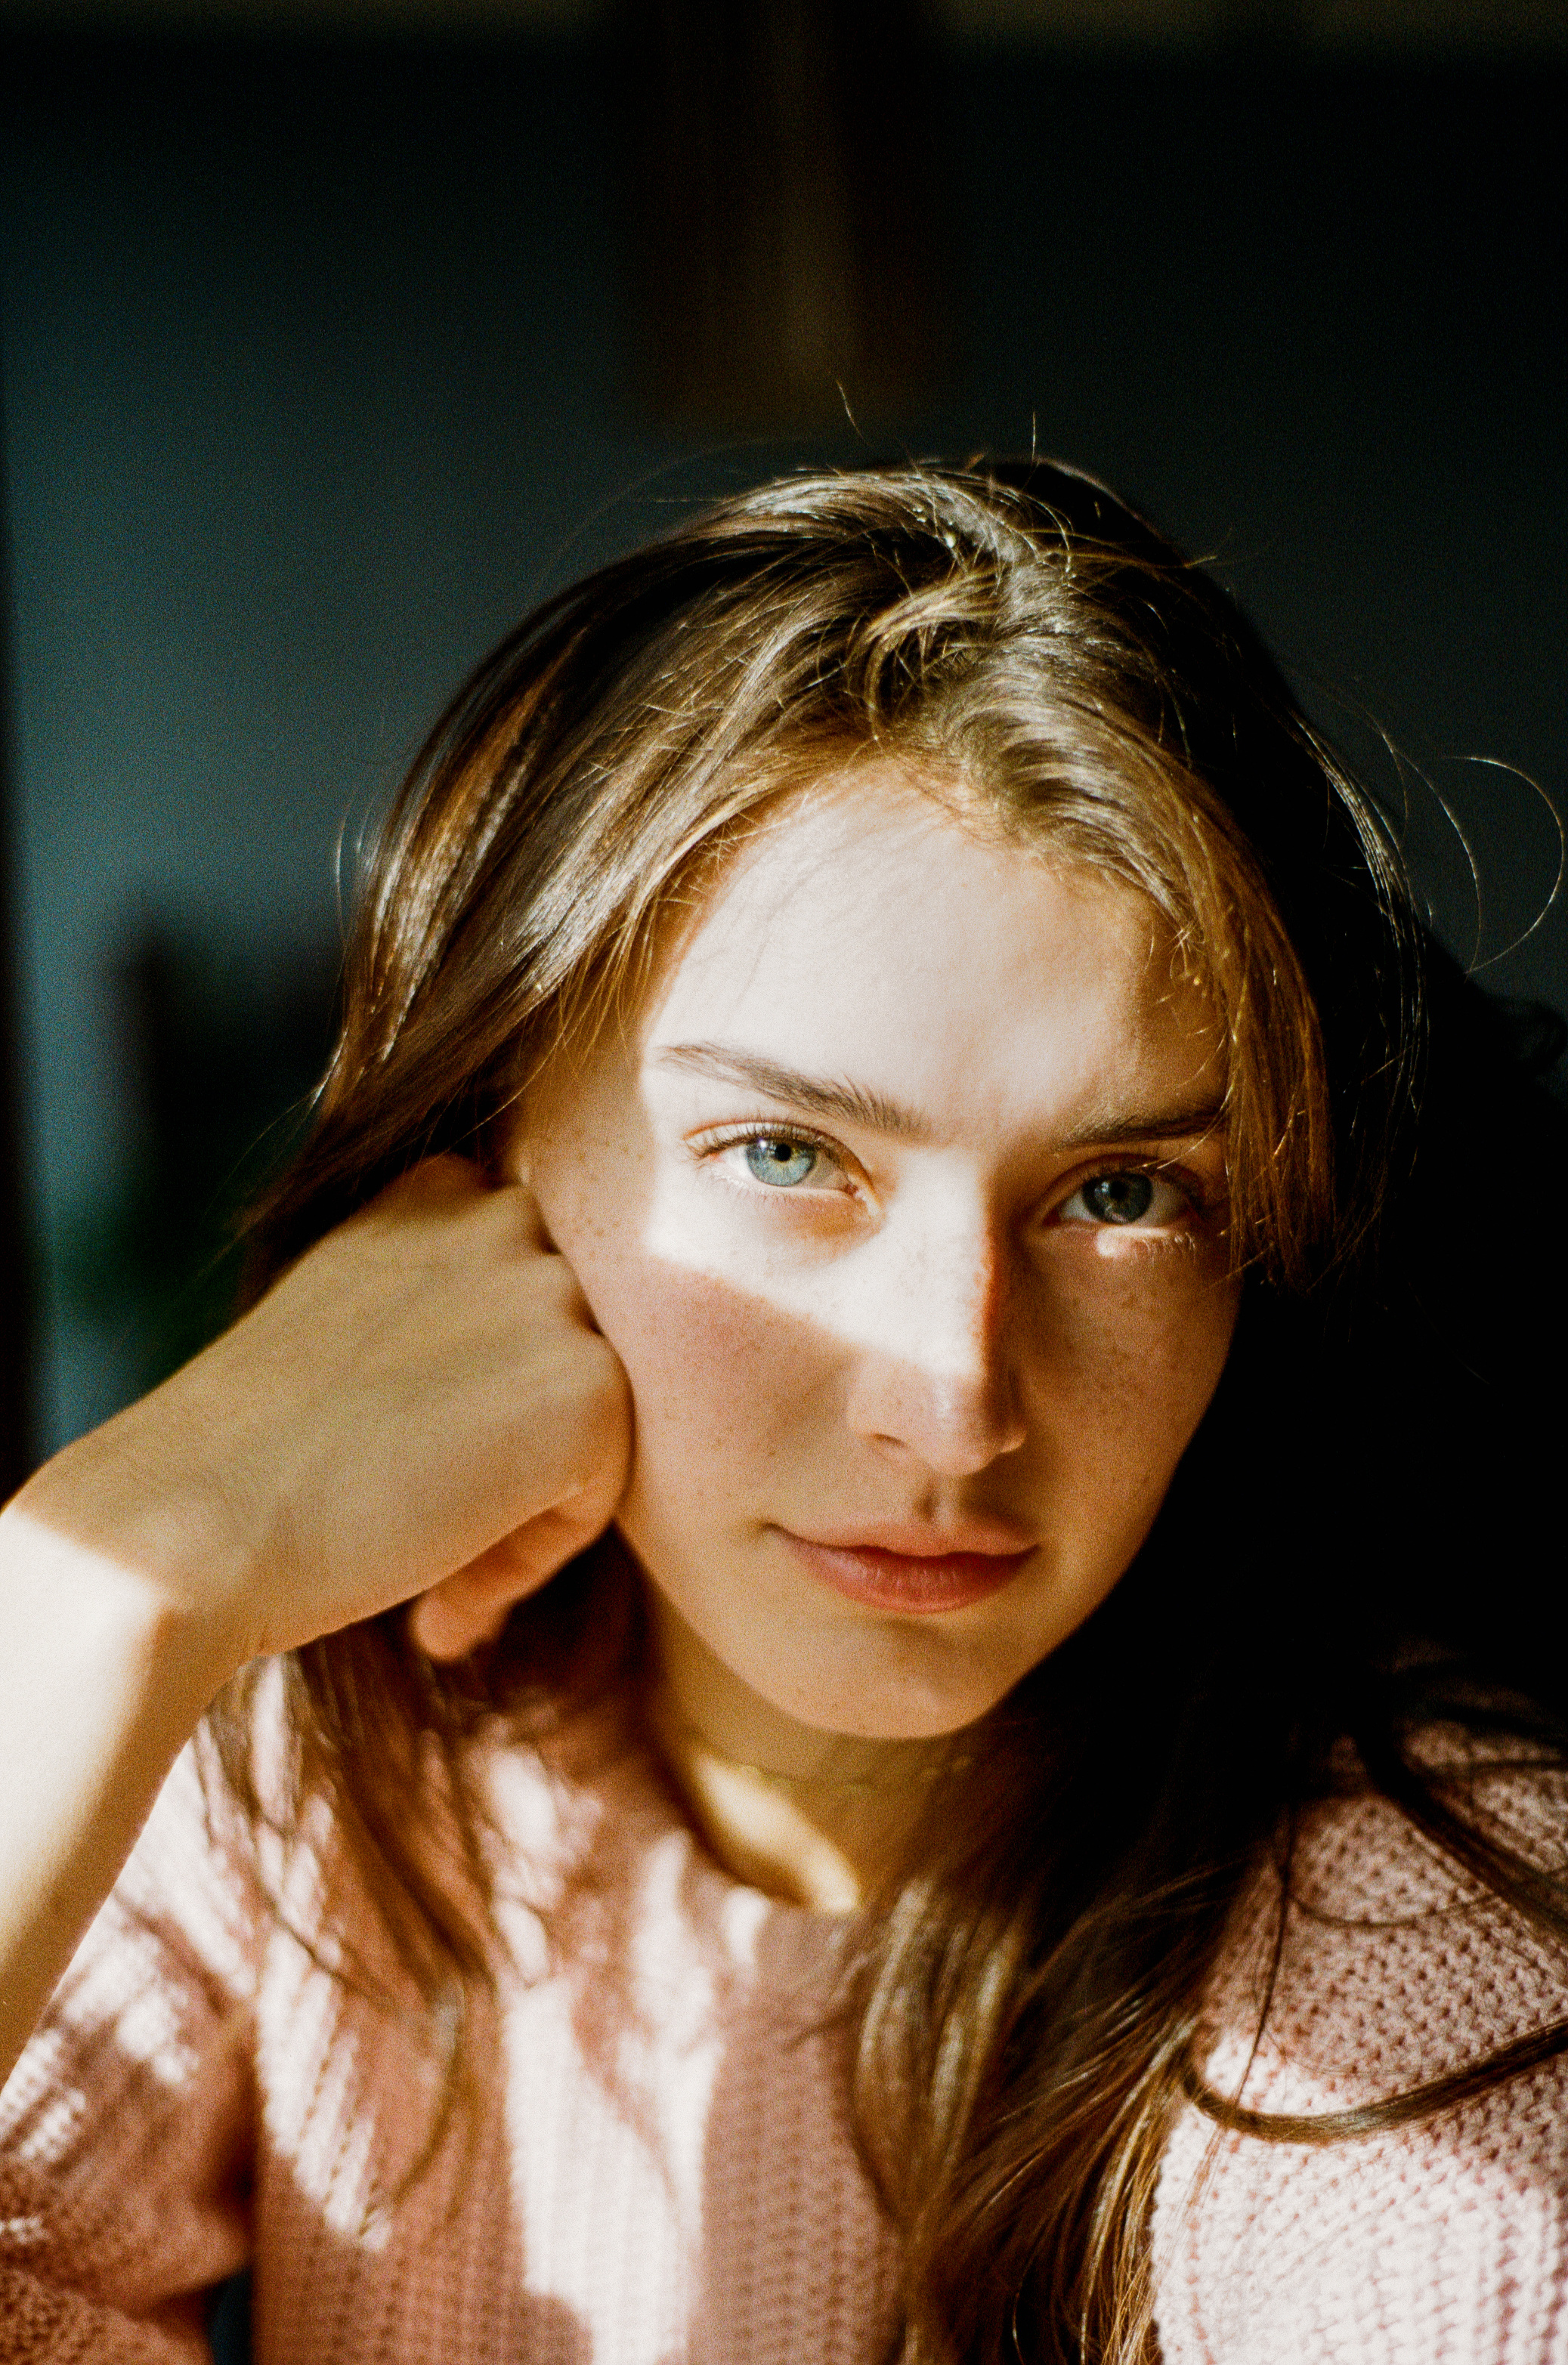 People 2075x3130 sunlight looking at viewer blue eyes Jesse Herzog women Jessica Clements face portrait display closeup